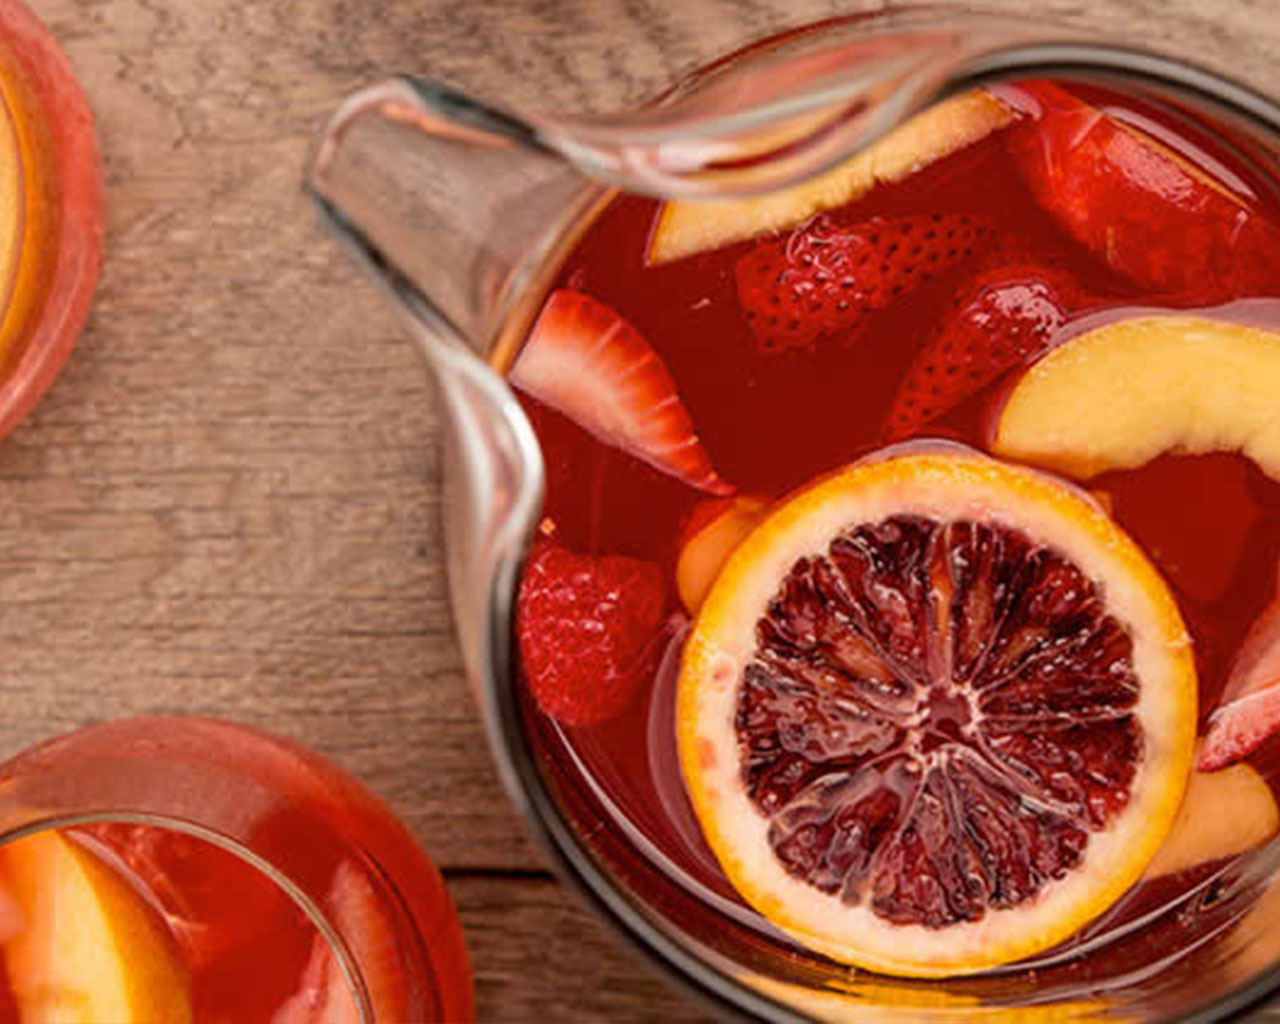 Simply Fruit Punch® Sangria